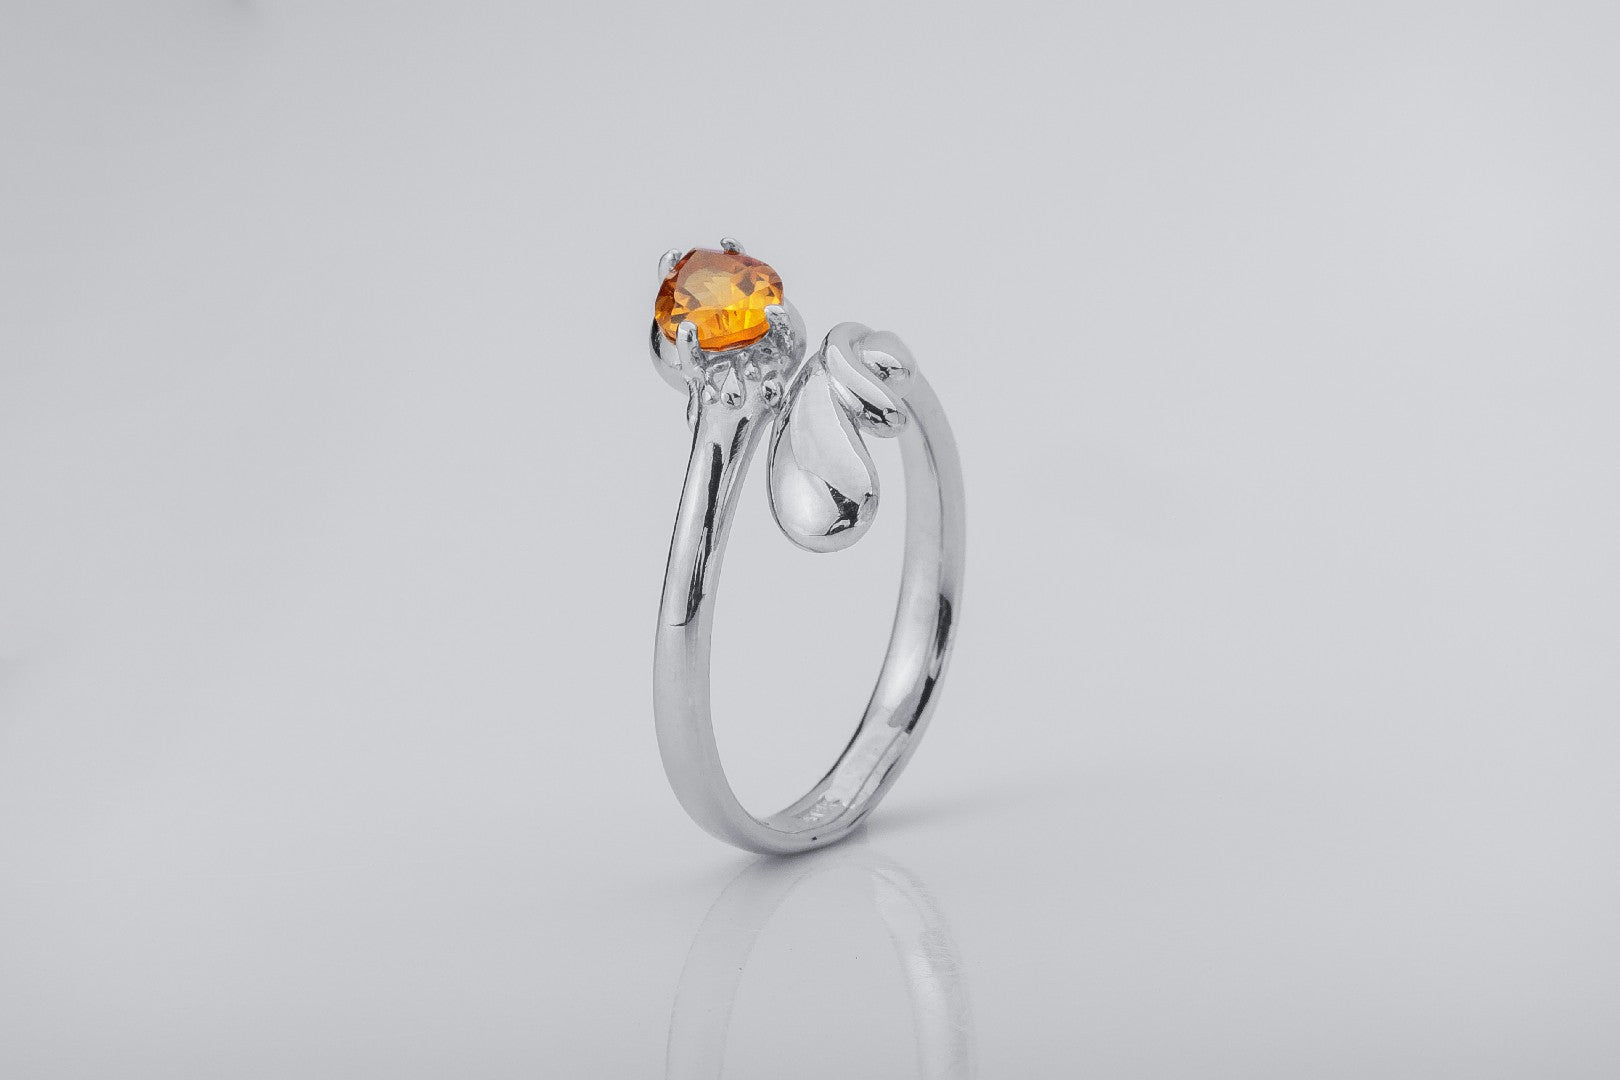 Candle Flame Citrine Ring, Rhodium plated 925 silver - vikingworkshop